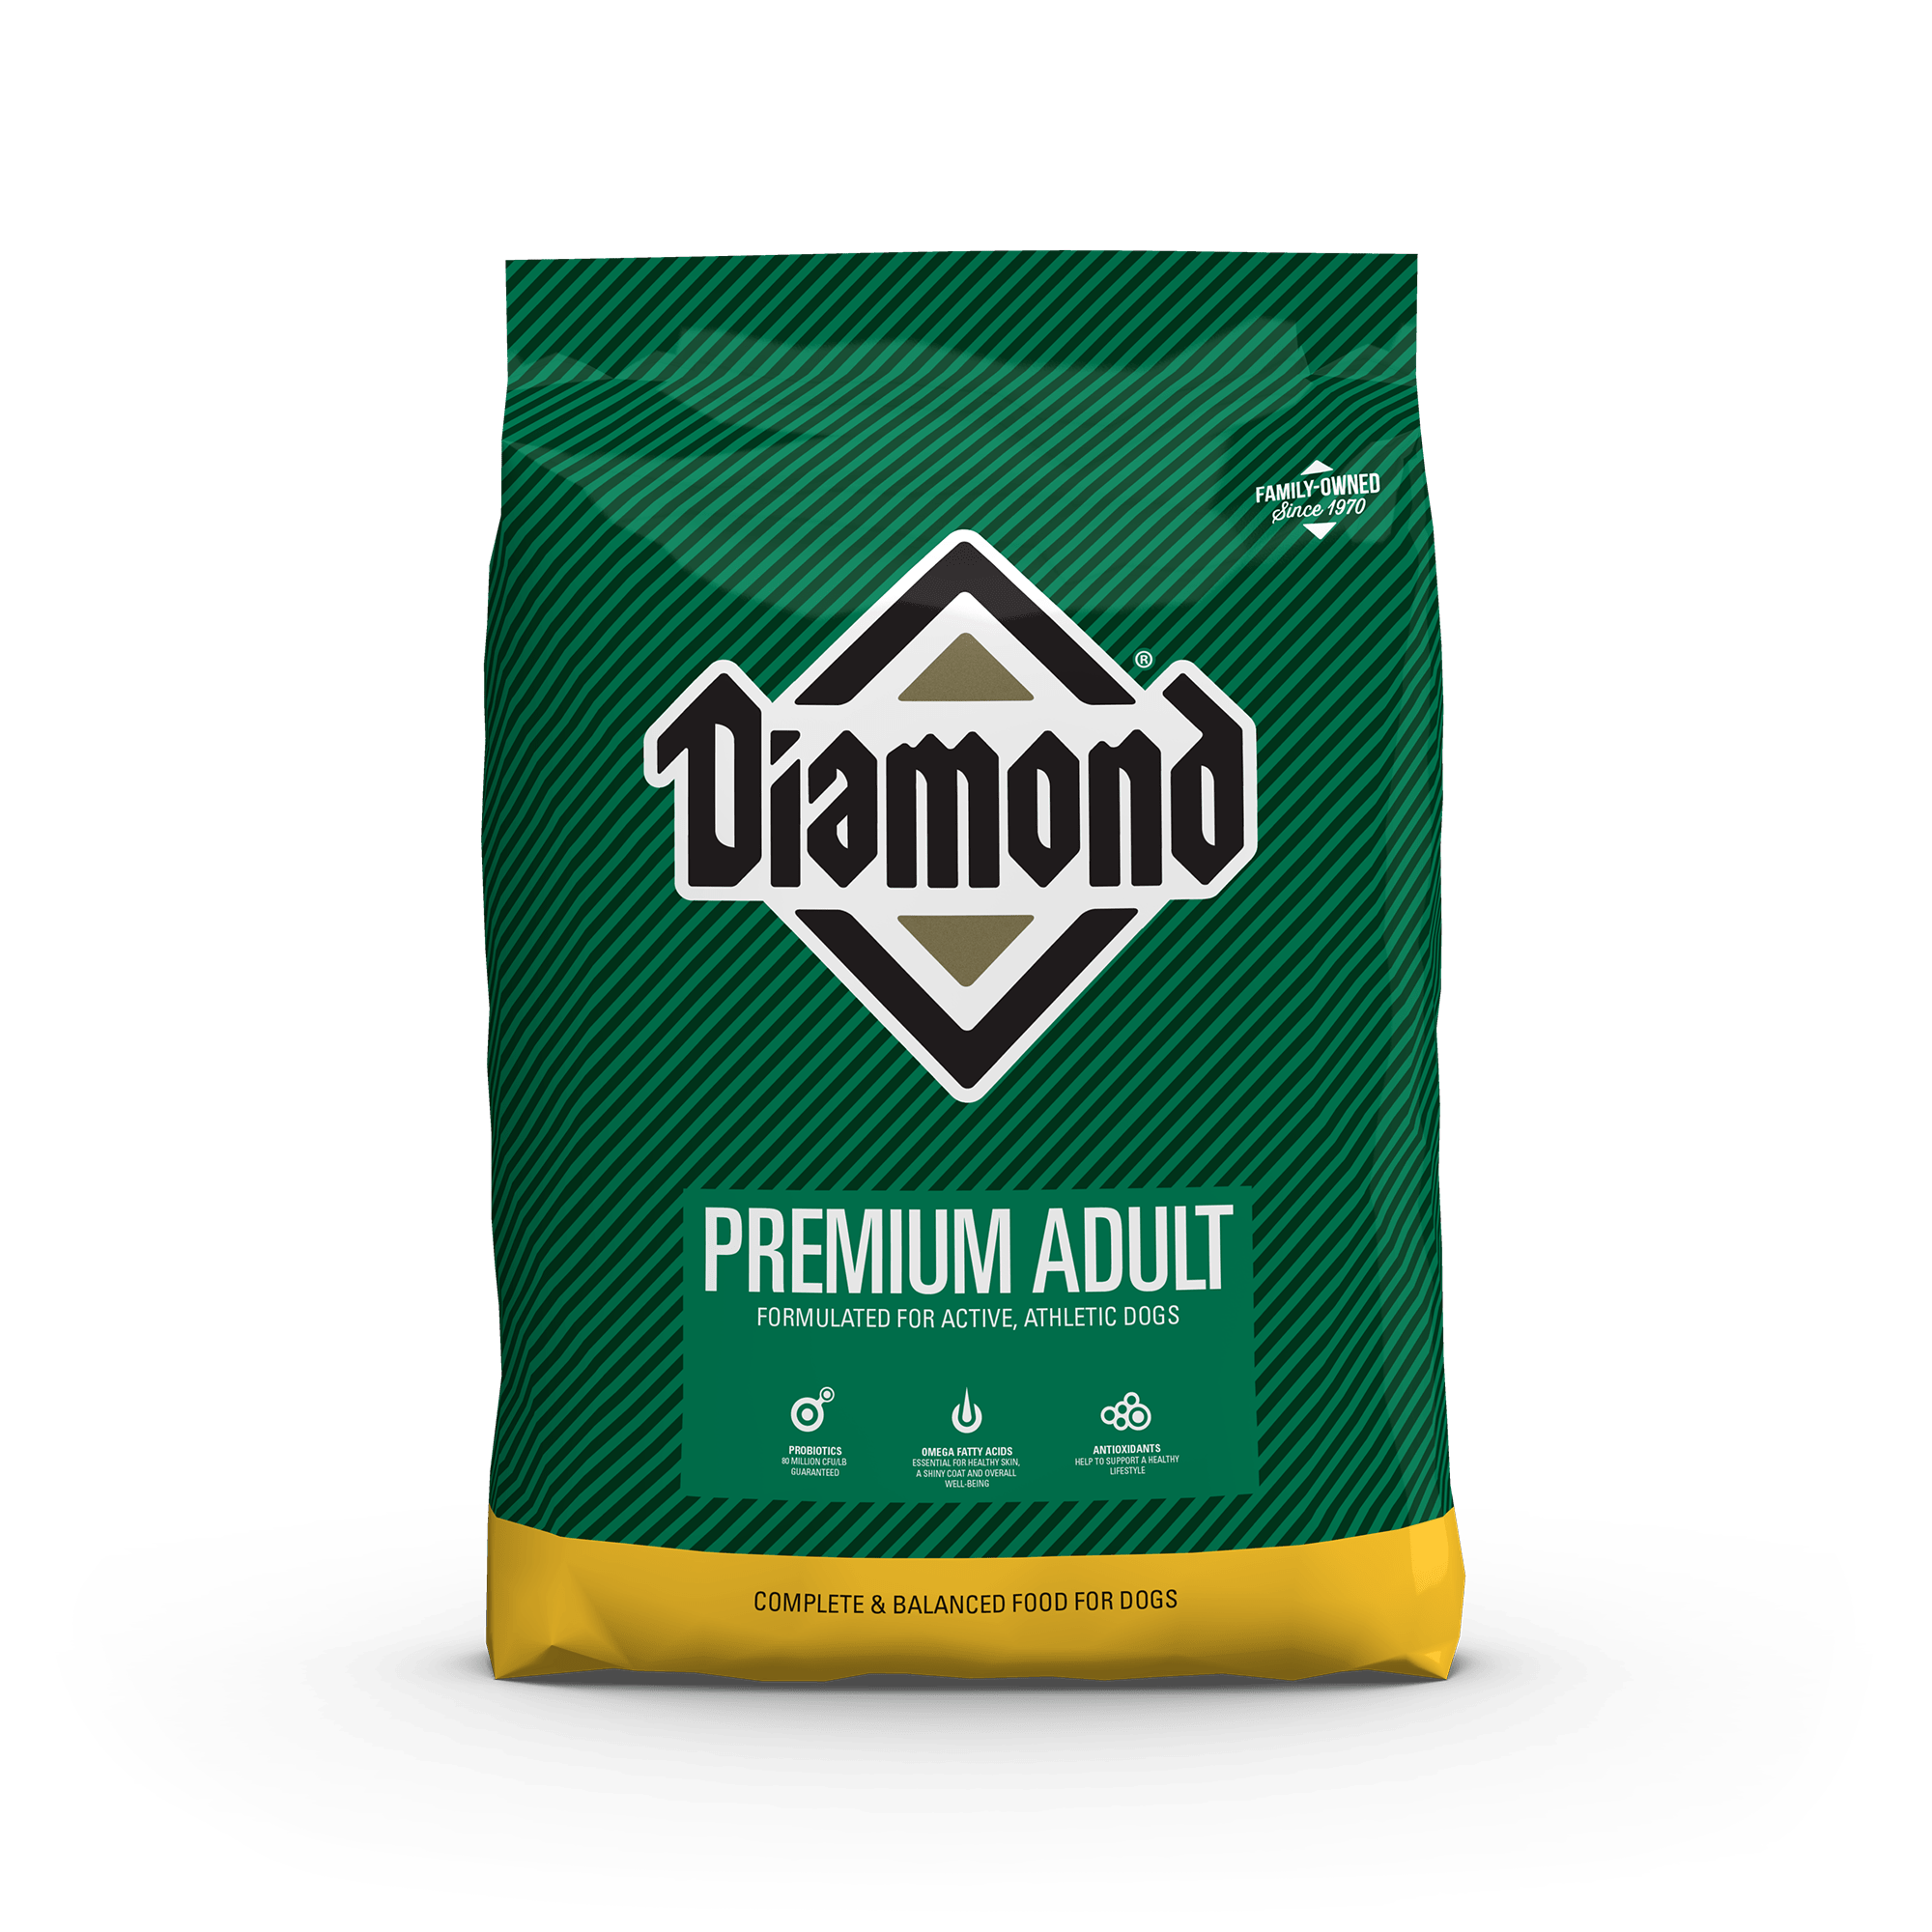 Diamond Premium Adult Formula for Dogs product packaging